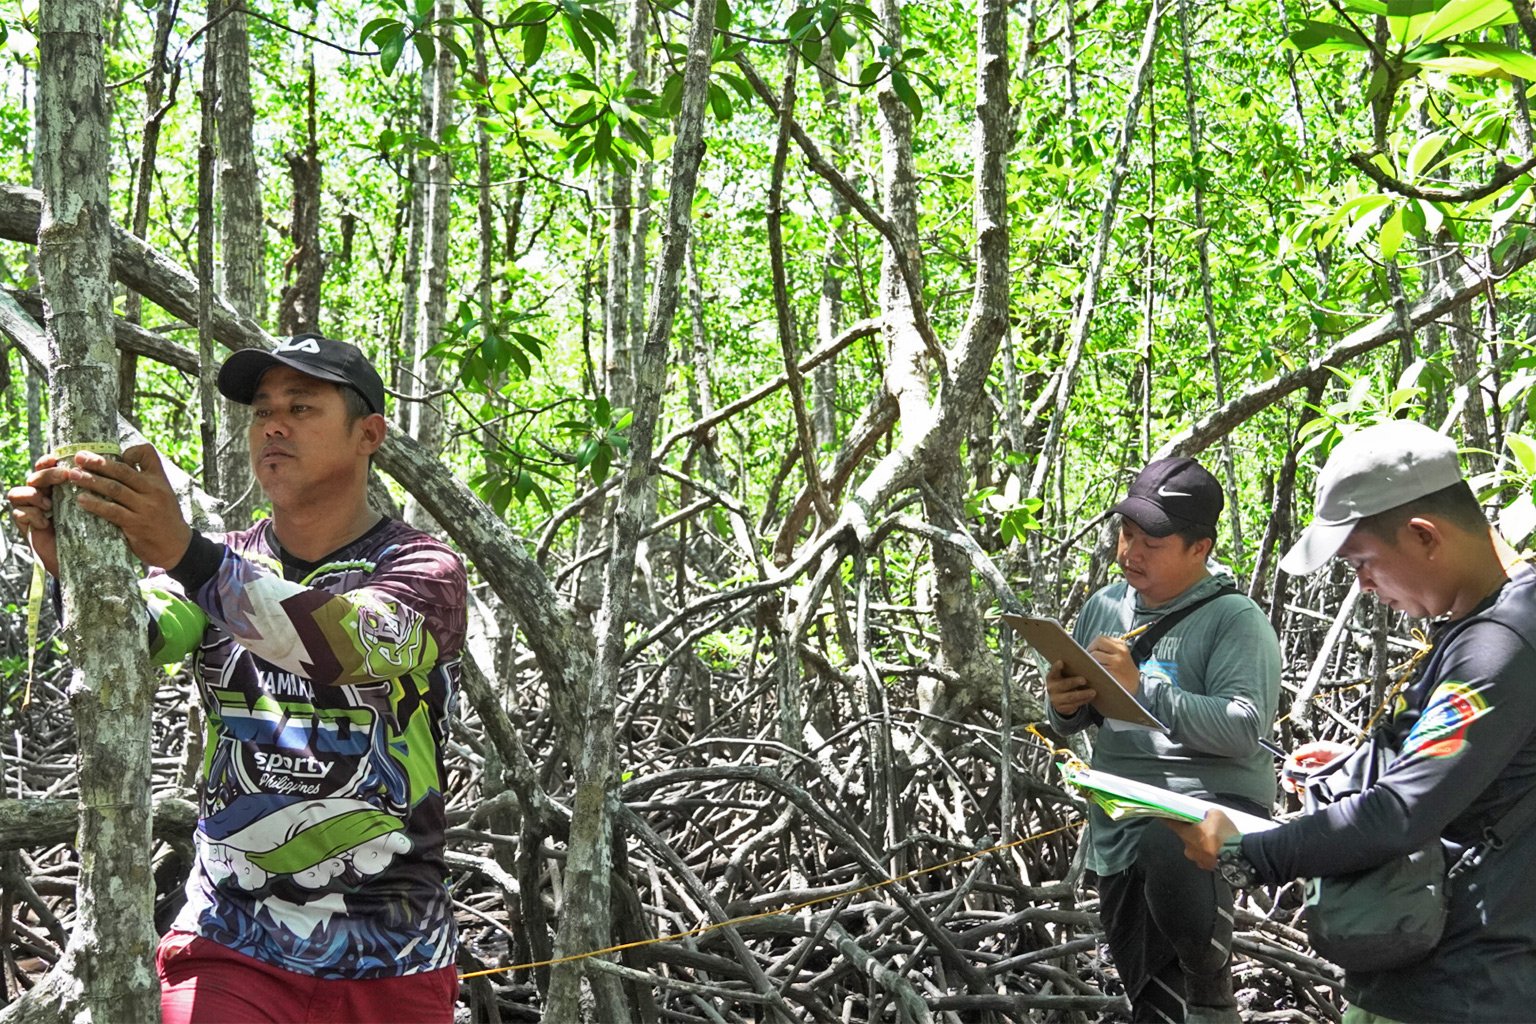 Researchers study mangrove trees in Malampaya Sound. Image by Keith Fabro for Mongabay.